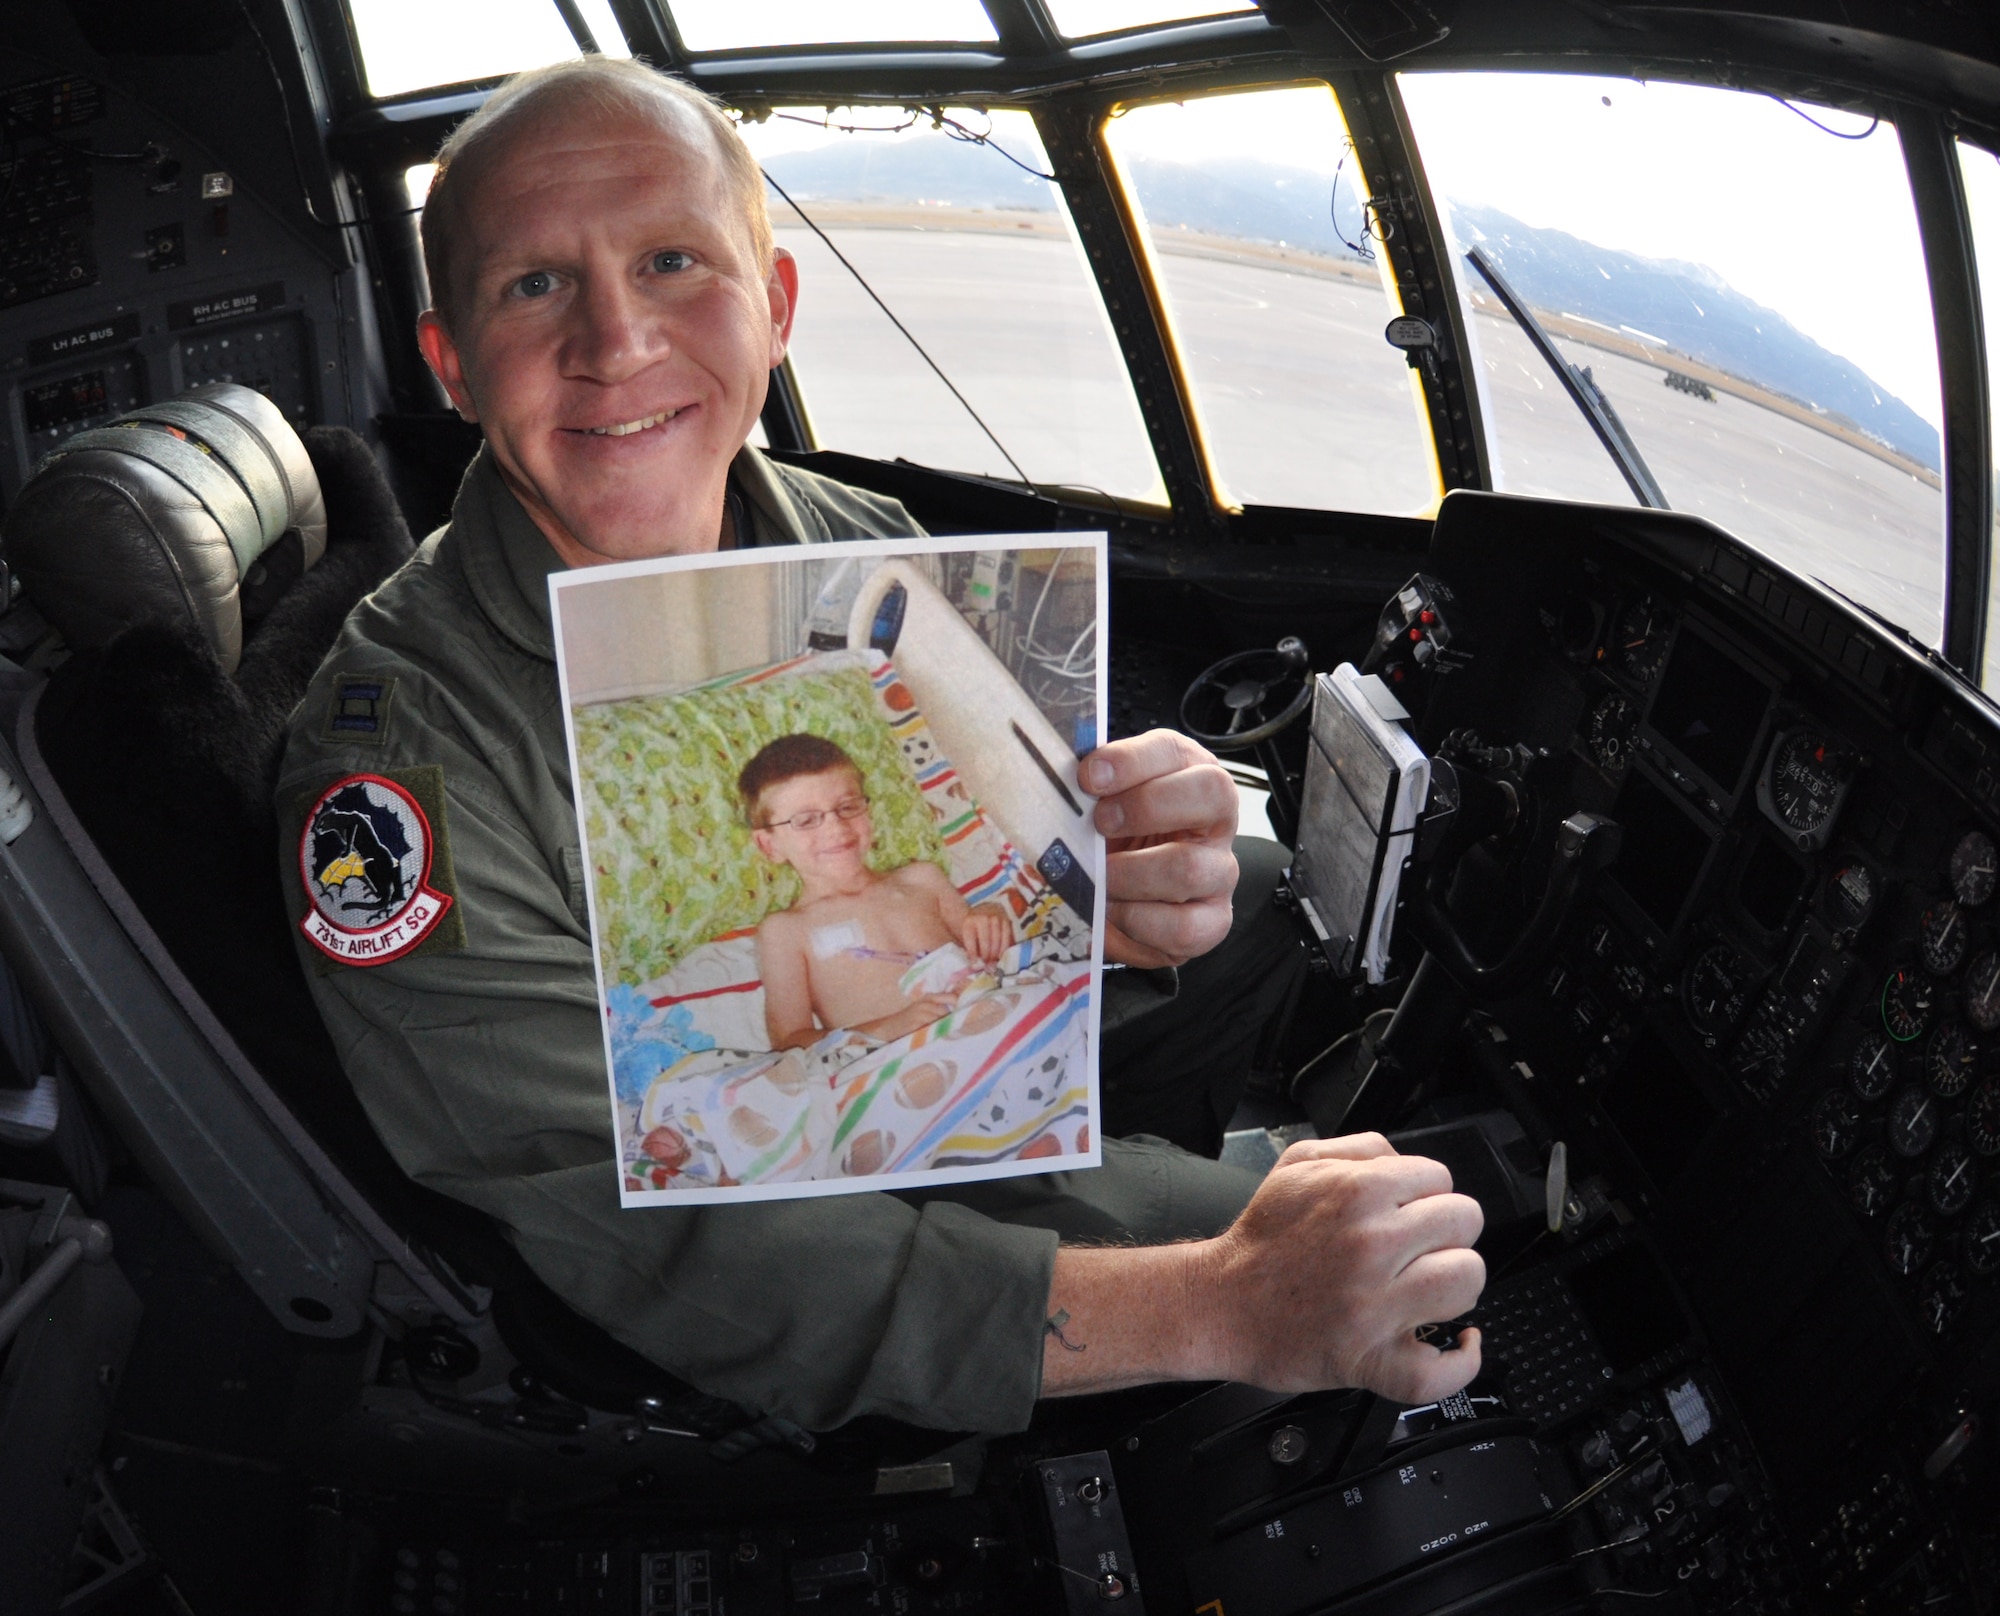 Air Force Reserve Capt. Robert Wilson gives the gift of life to a seven-year-old boy, some 1,800 miles away. Capt. Wilson holds a photo of A.J., during one of his stays in the hospital. (U.S. Air Force photo/ Staff Sgt. Stephen J. Collier)  